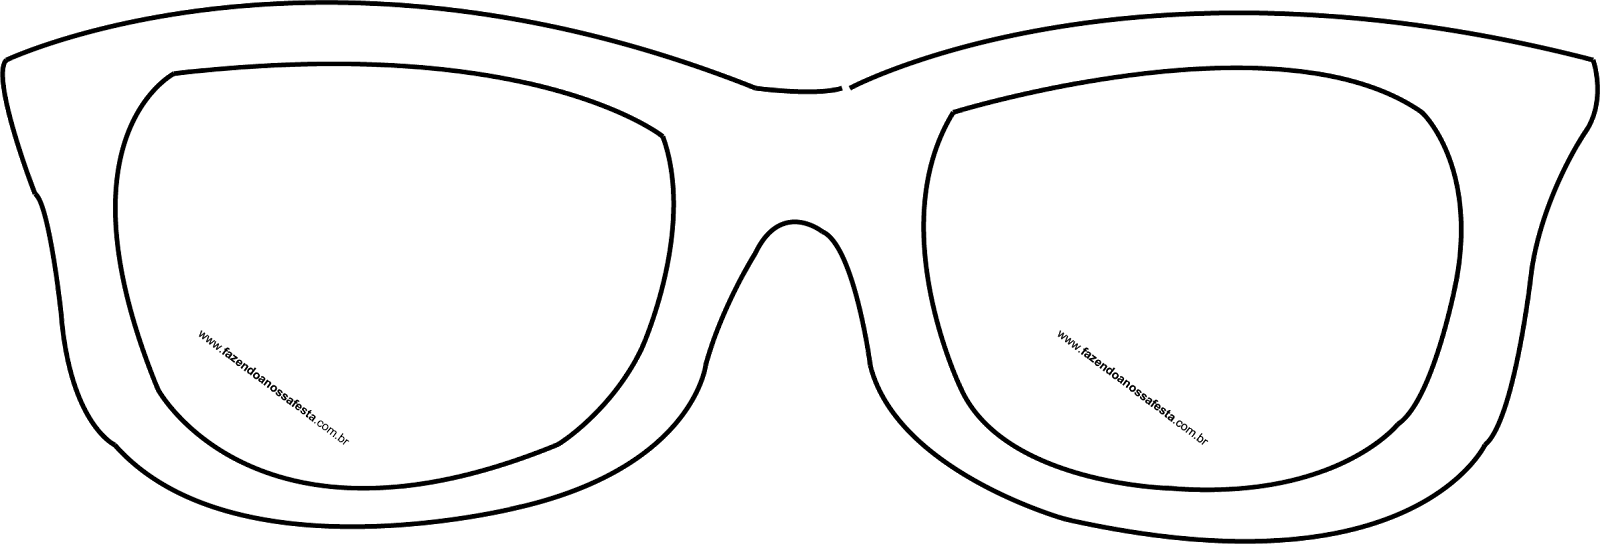 Molde Eye Goggles Sunglasses Glasses PNG Image High Quality Clipart